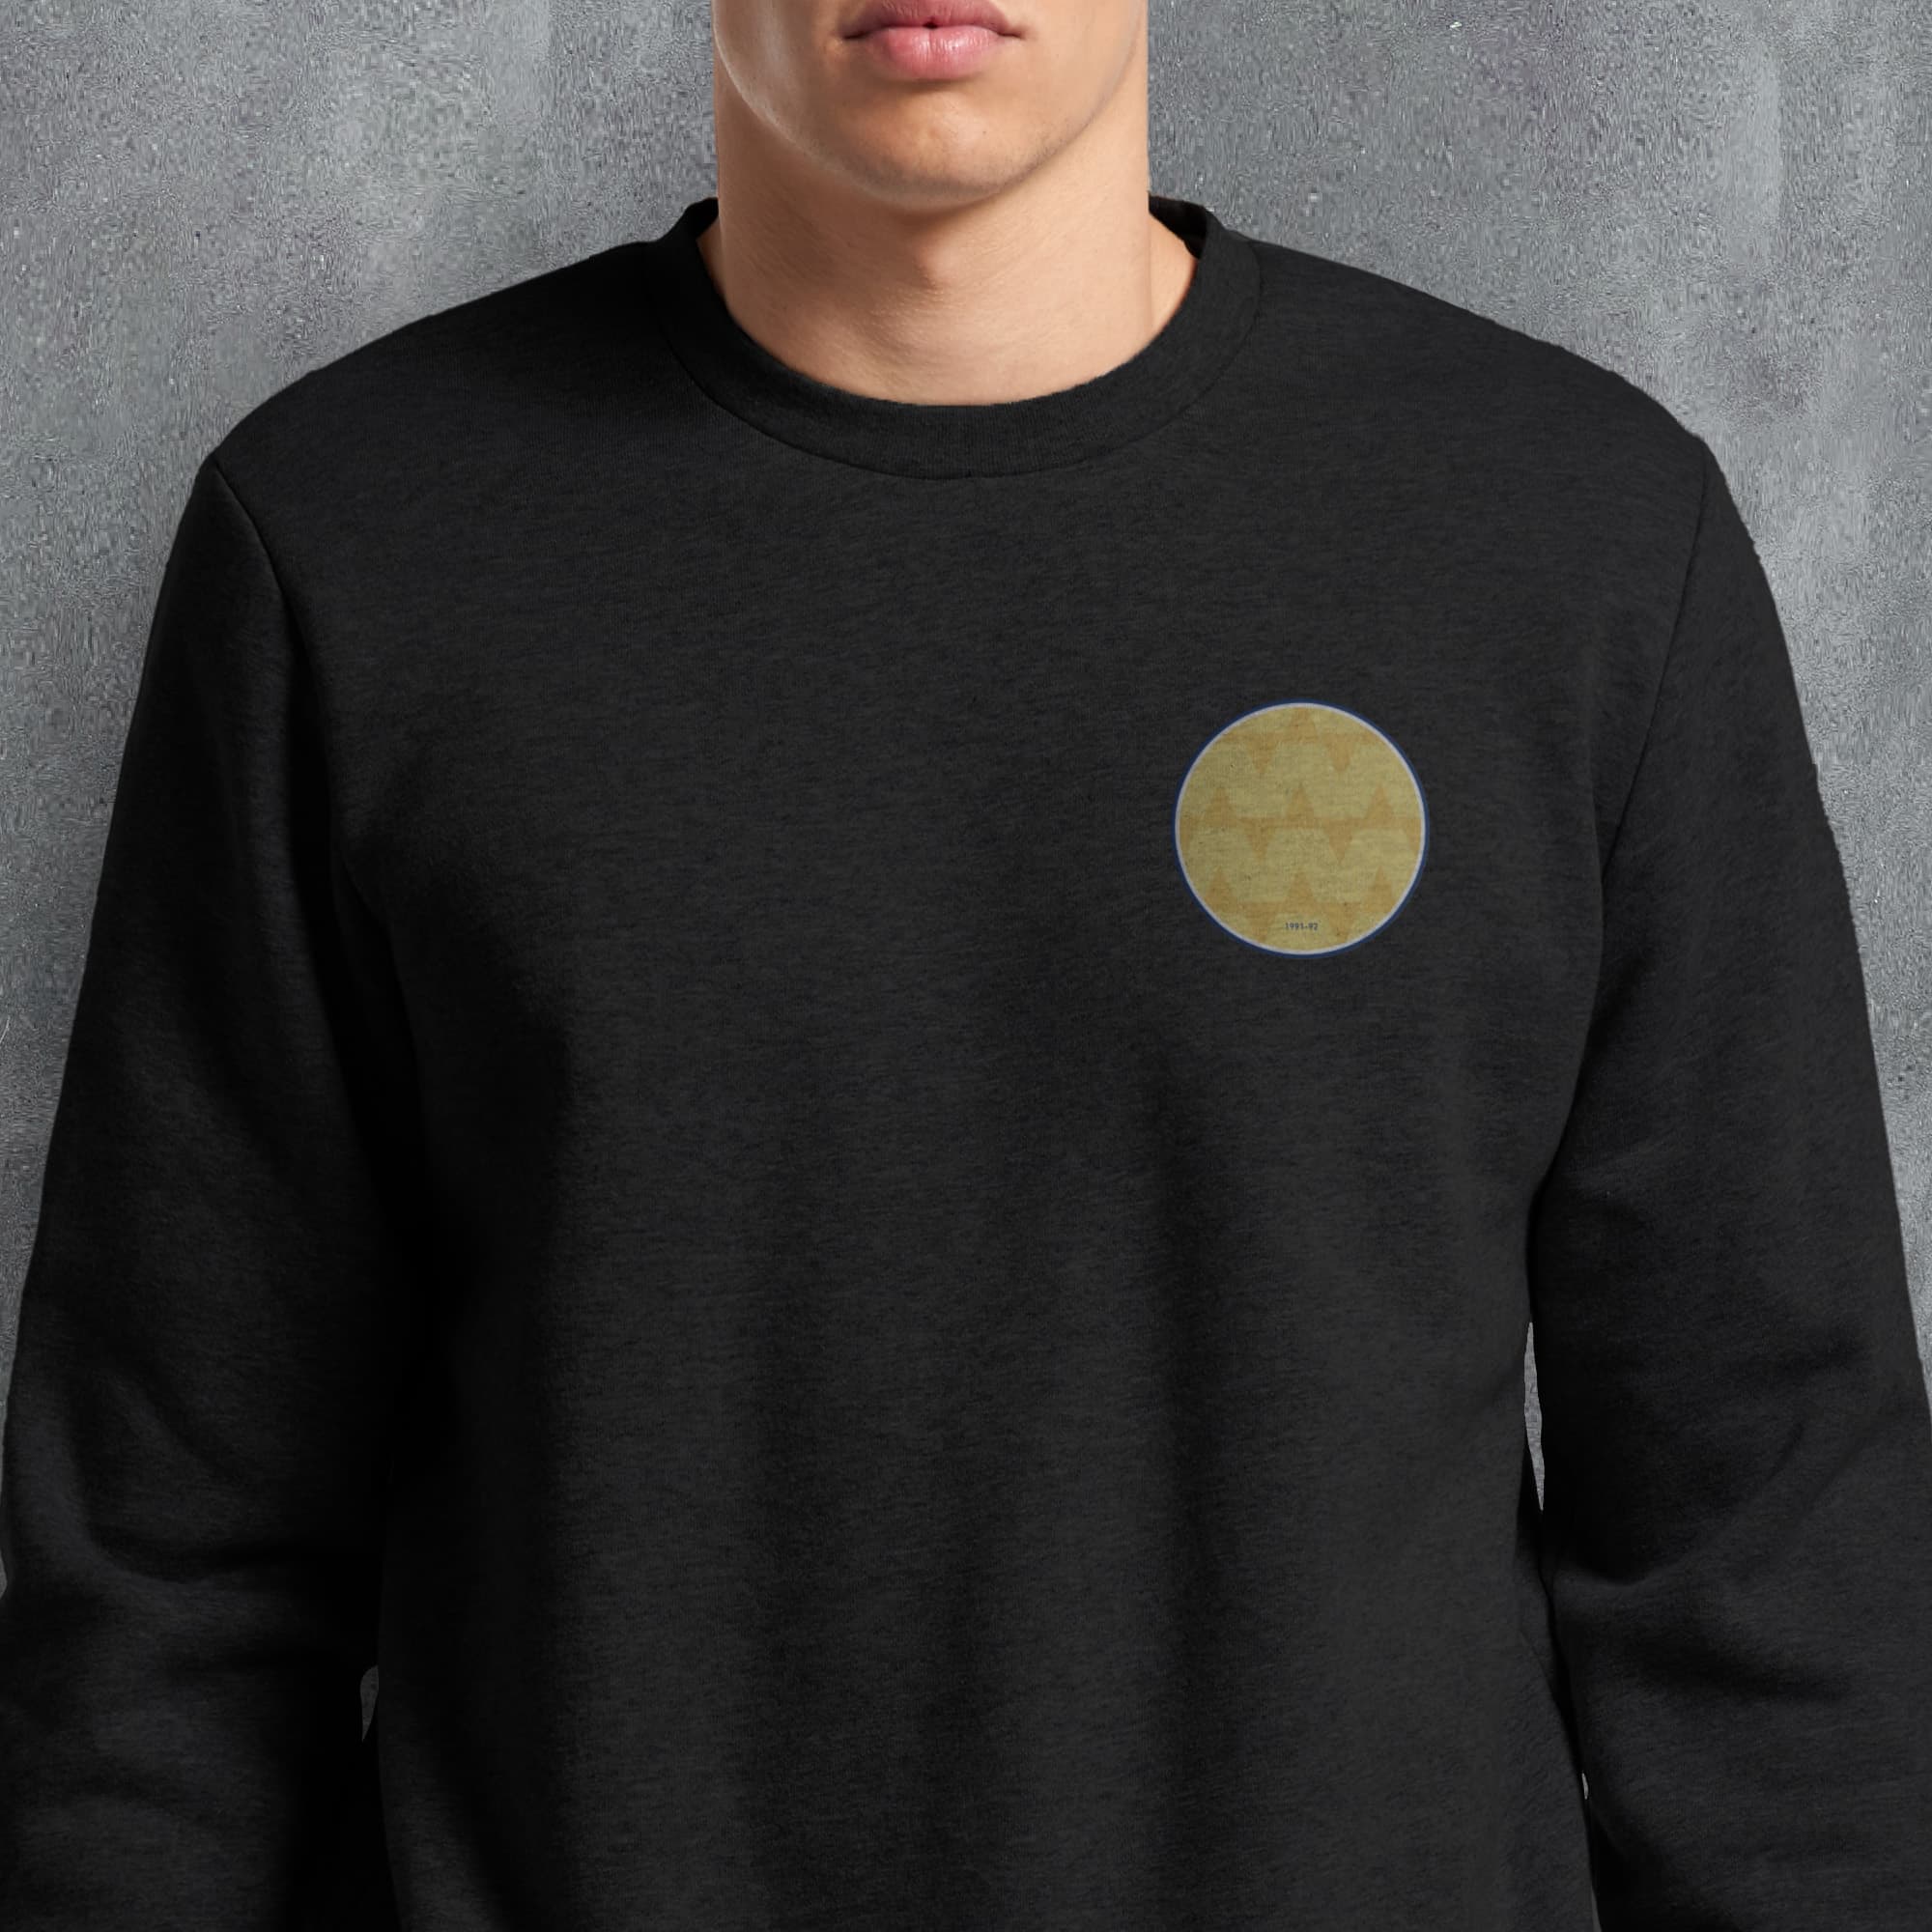 a man wearing a black sweatshirt with a yellow circle on it